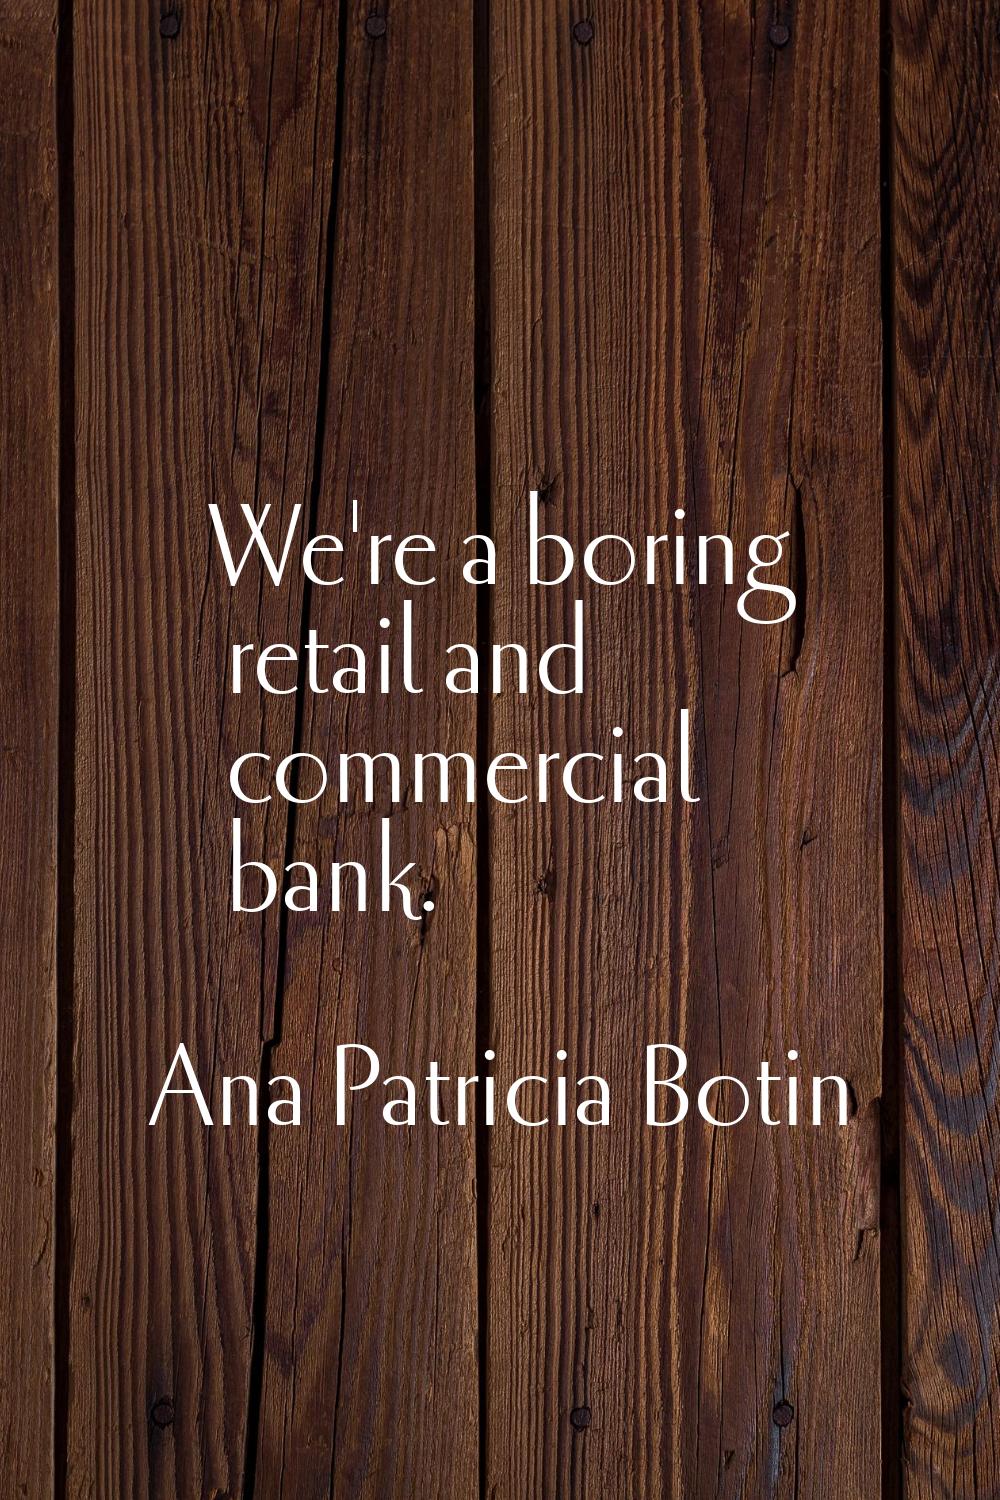 We're a boring retail and commercial bank.